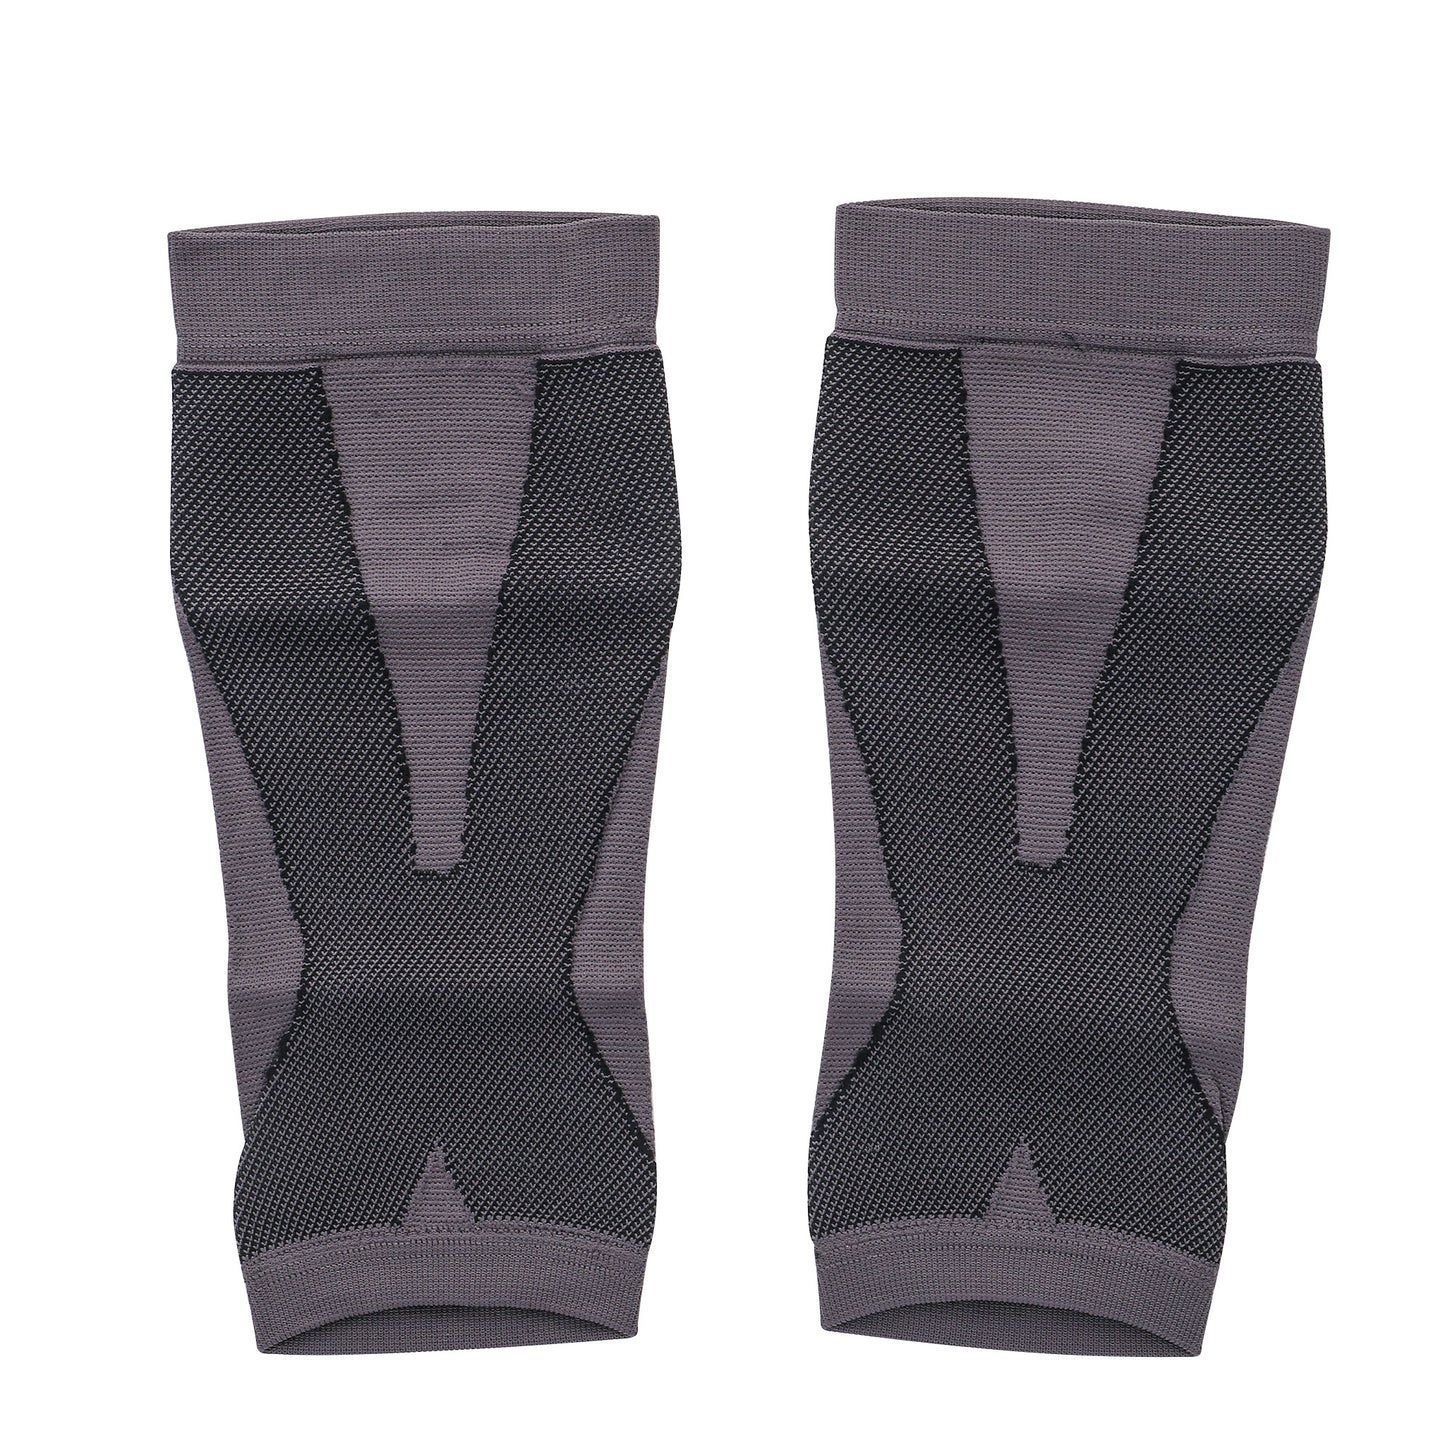 NOVAYAD Elbow Guards For Athletic Use Compression Elbow Pads Arm Brace Support Breathable Elbow Wraps